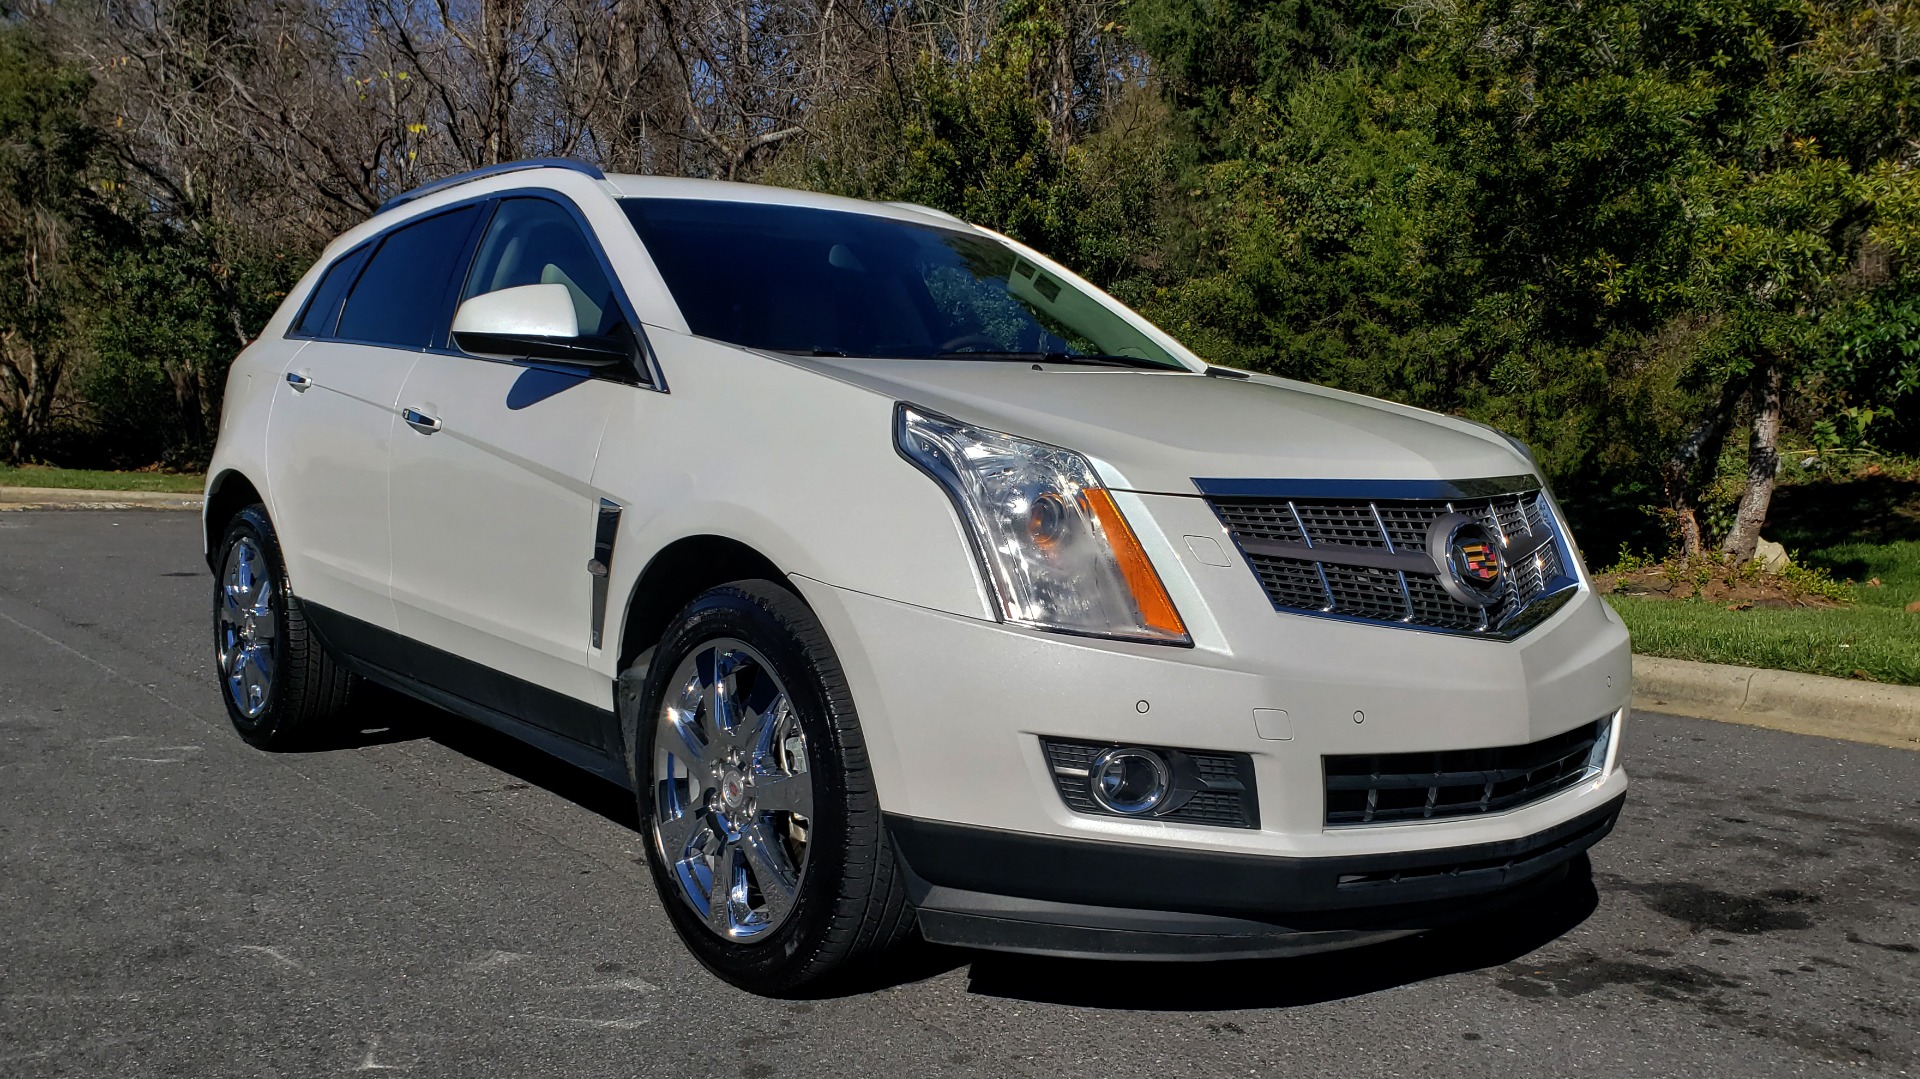 Used 2011 Cadillac SRX PERFORMANCE COLLECTION / ENT SYS / BOSE / REARVIEW for sale Sold at Formula Imports in Charlotte NC 28227 4